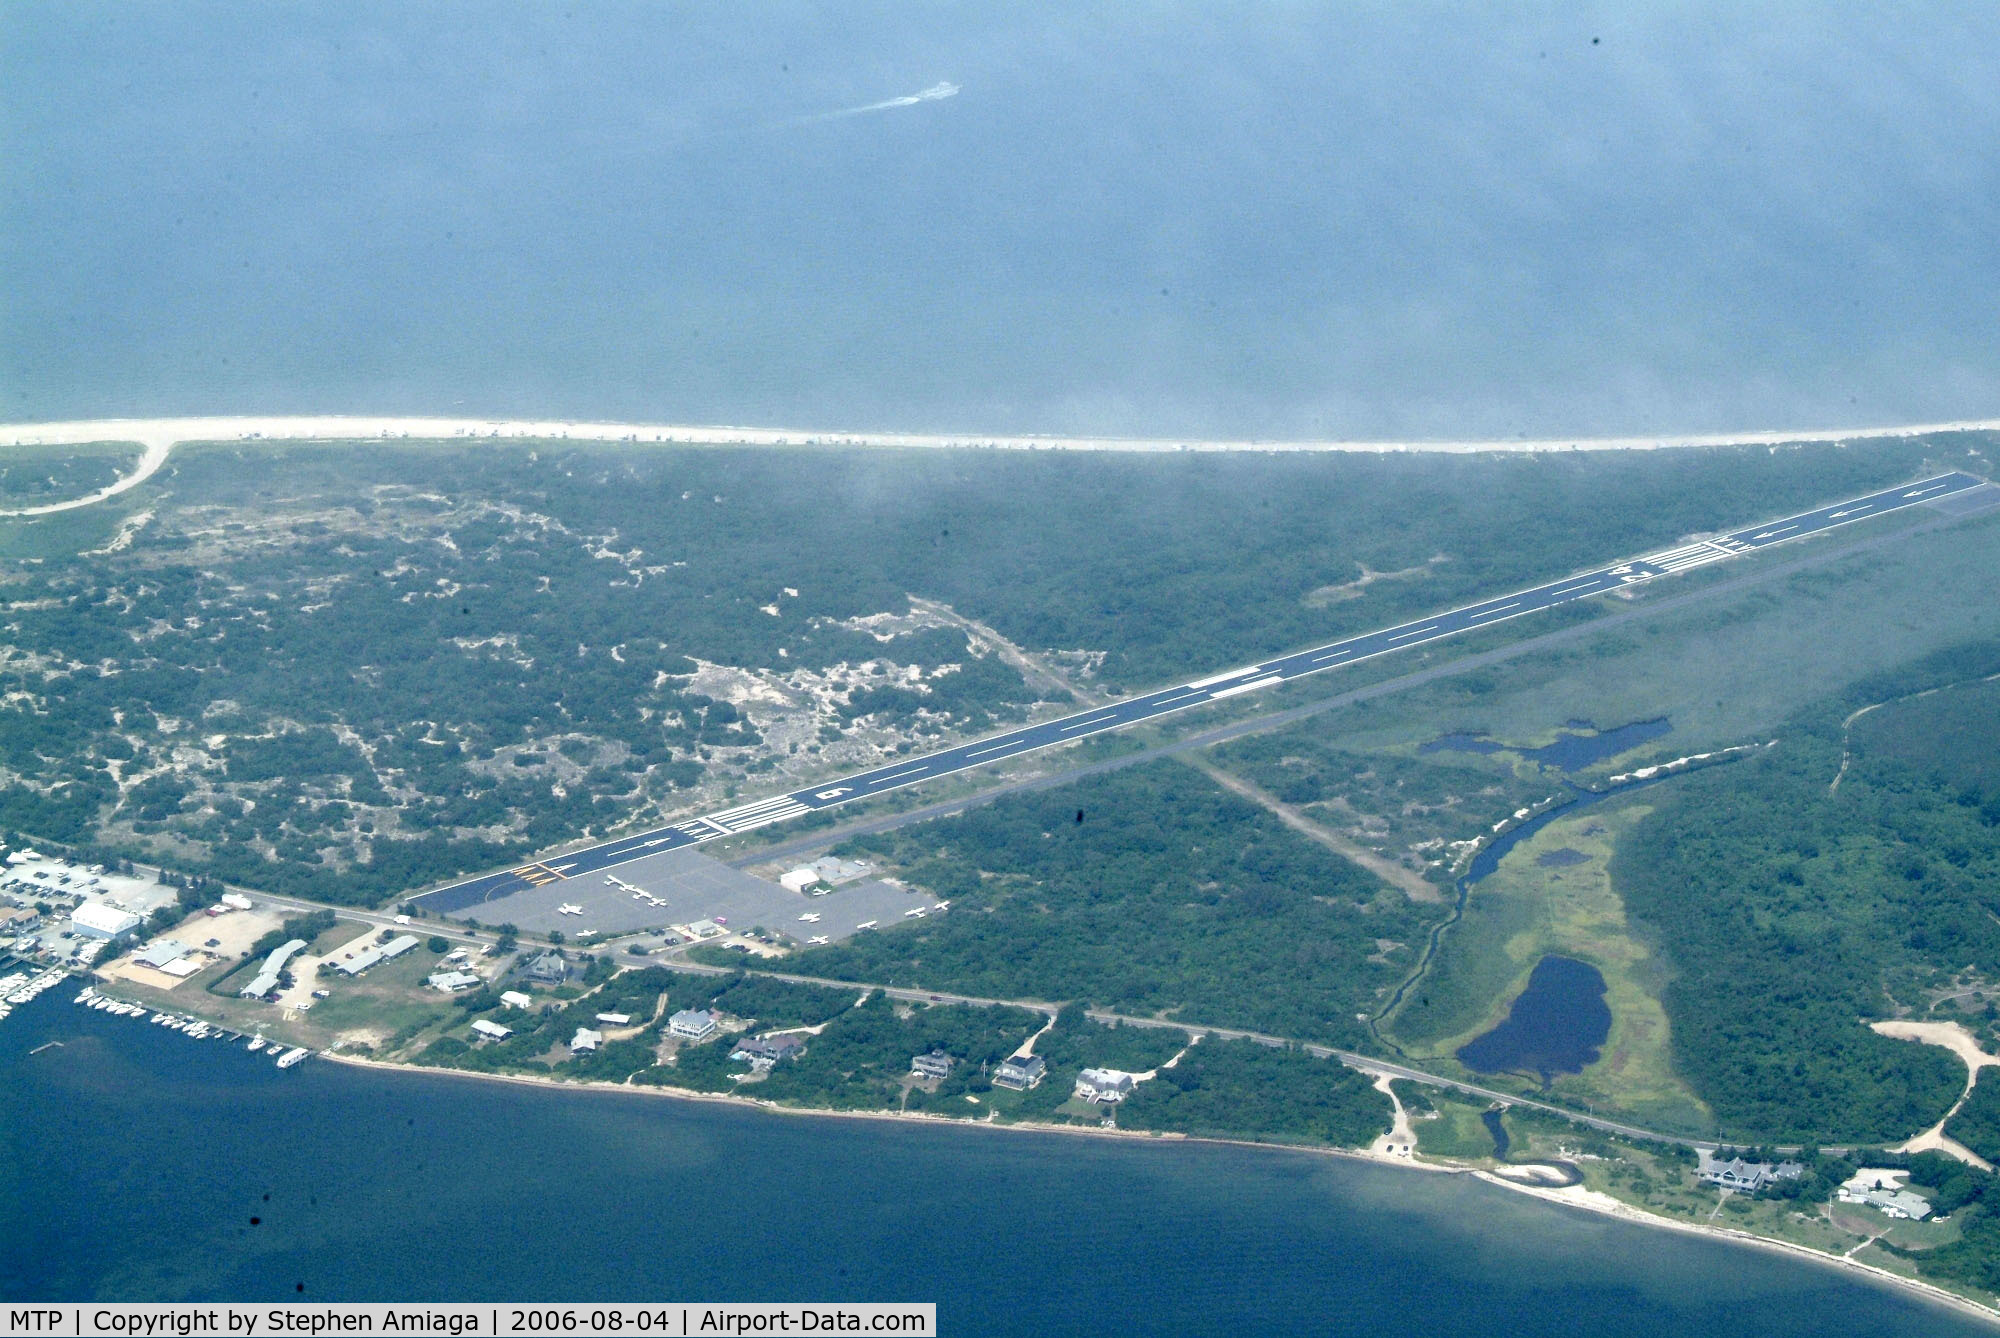 Montauk Airport (MTP) - Montauk as seen with the new paintjob - on our way to Block Island, 3500MSL